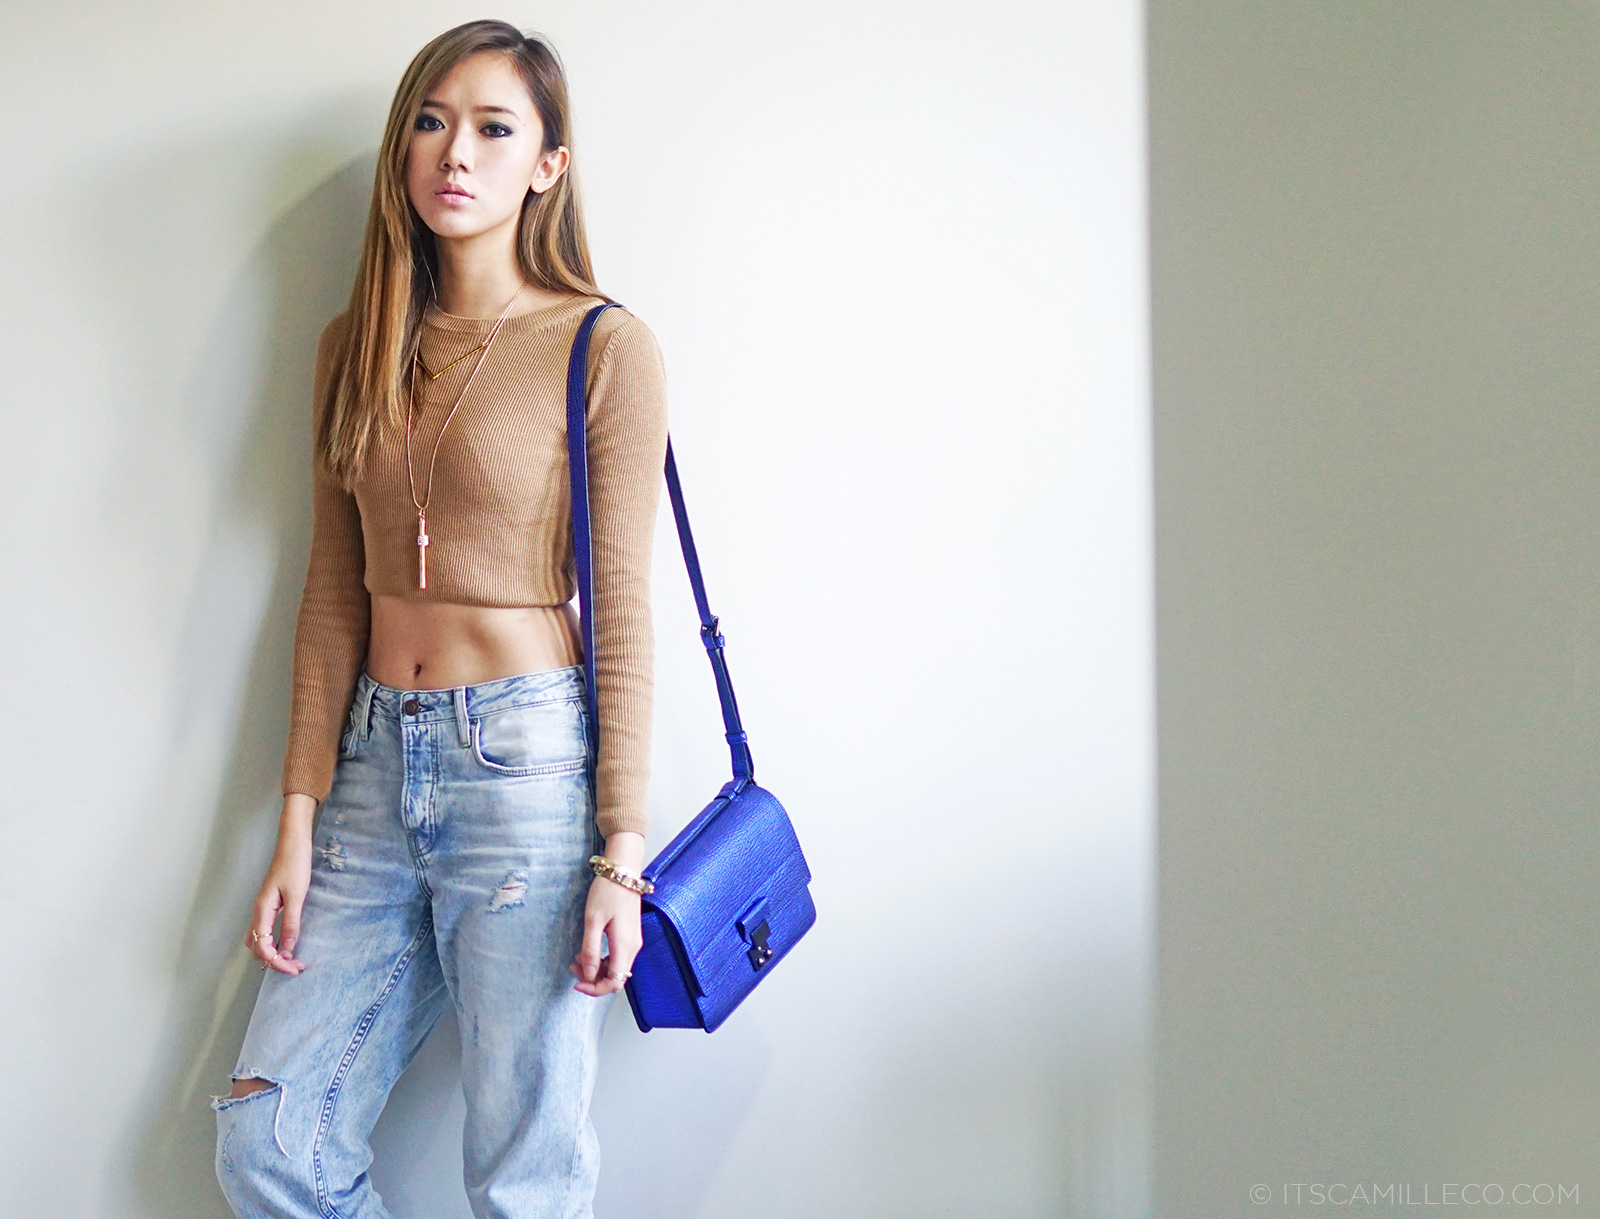 Topshop Cropped Top and Baggy Jeans, 3.1 Phillip Lim Pashli Mini, Native Boots | www.itscamilleco.com